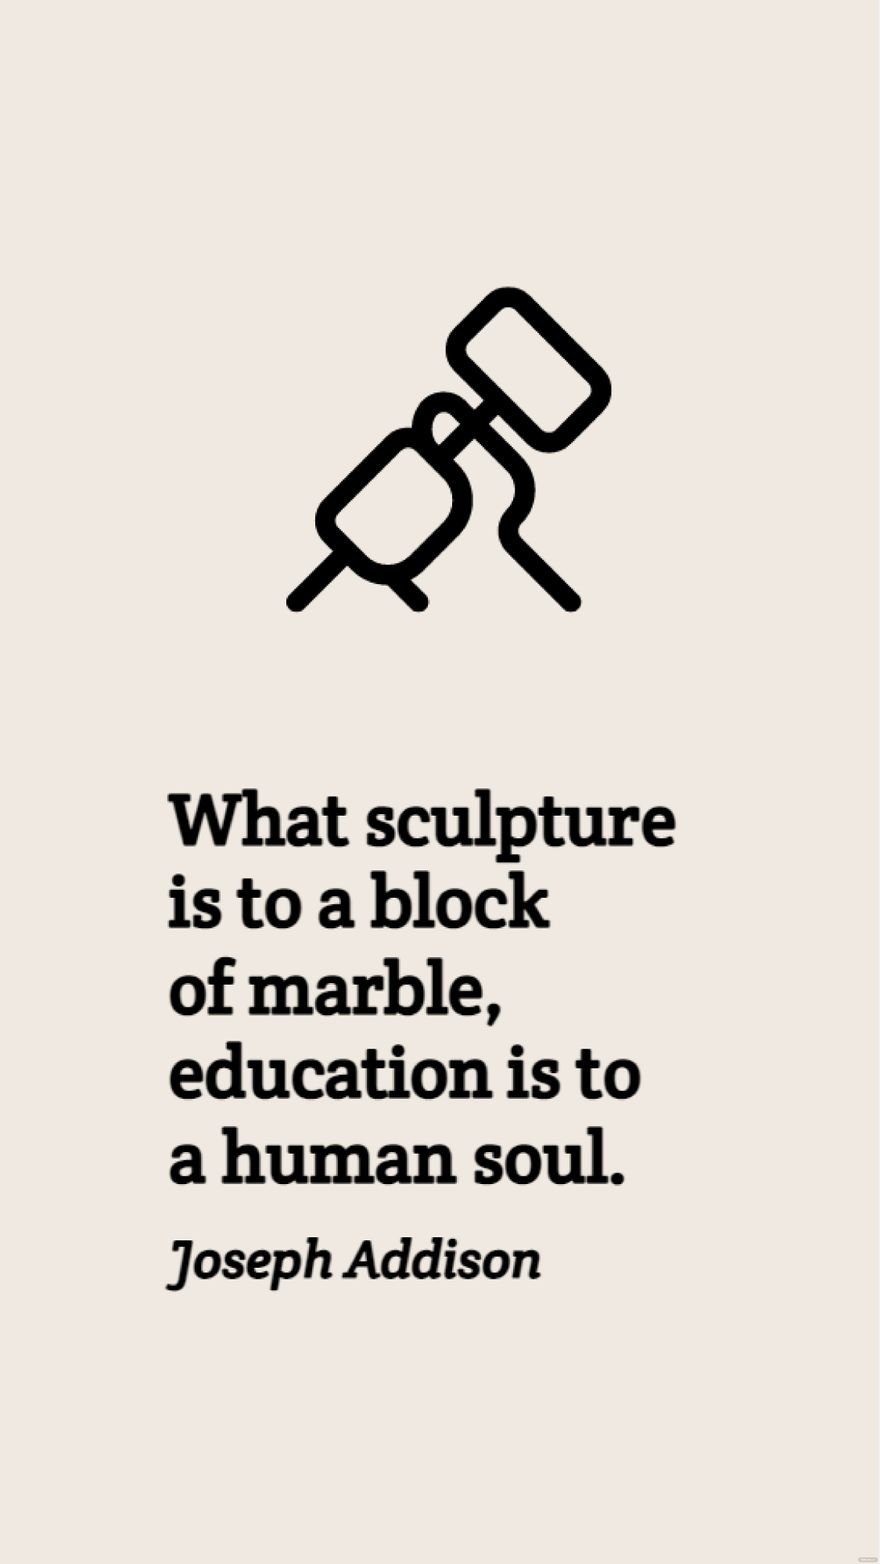 Joseph Addison - What sculpture is to a block of marble, education is to a human soul. in JPG